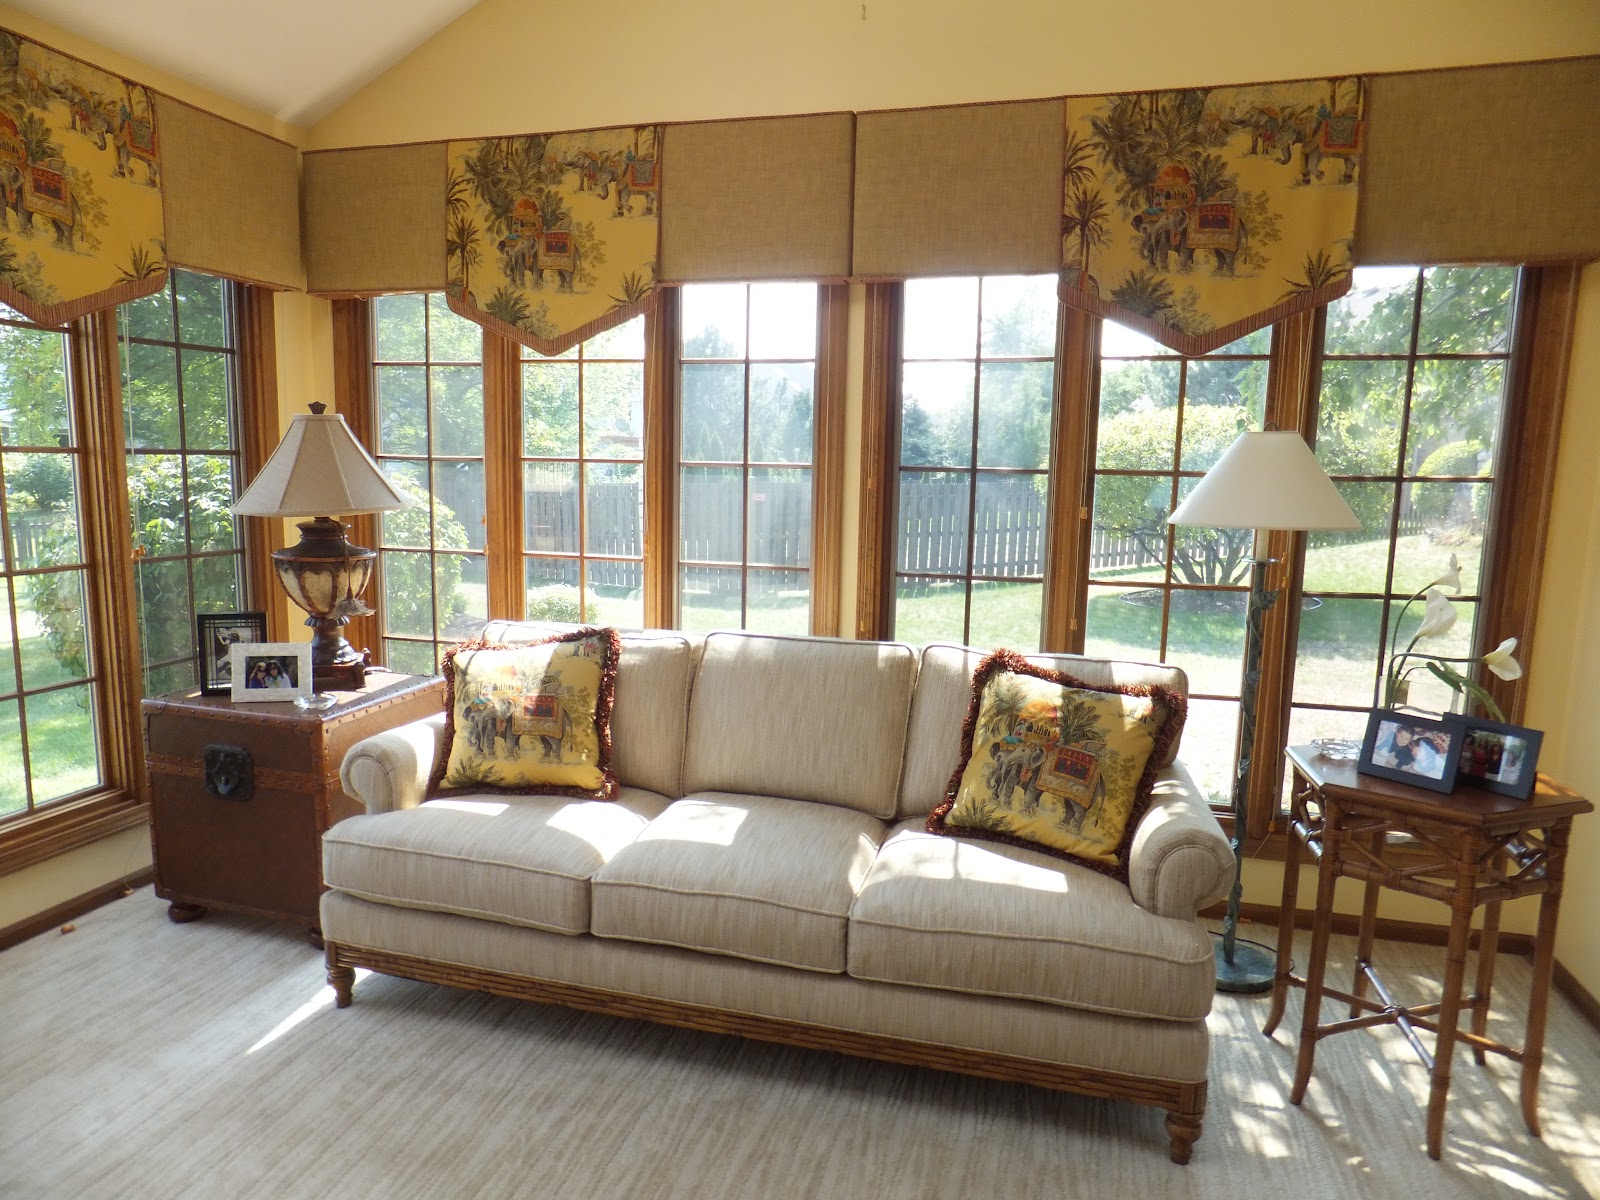 Deck Up Your Home With Curtains and Carpets